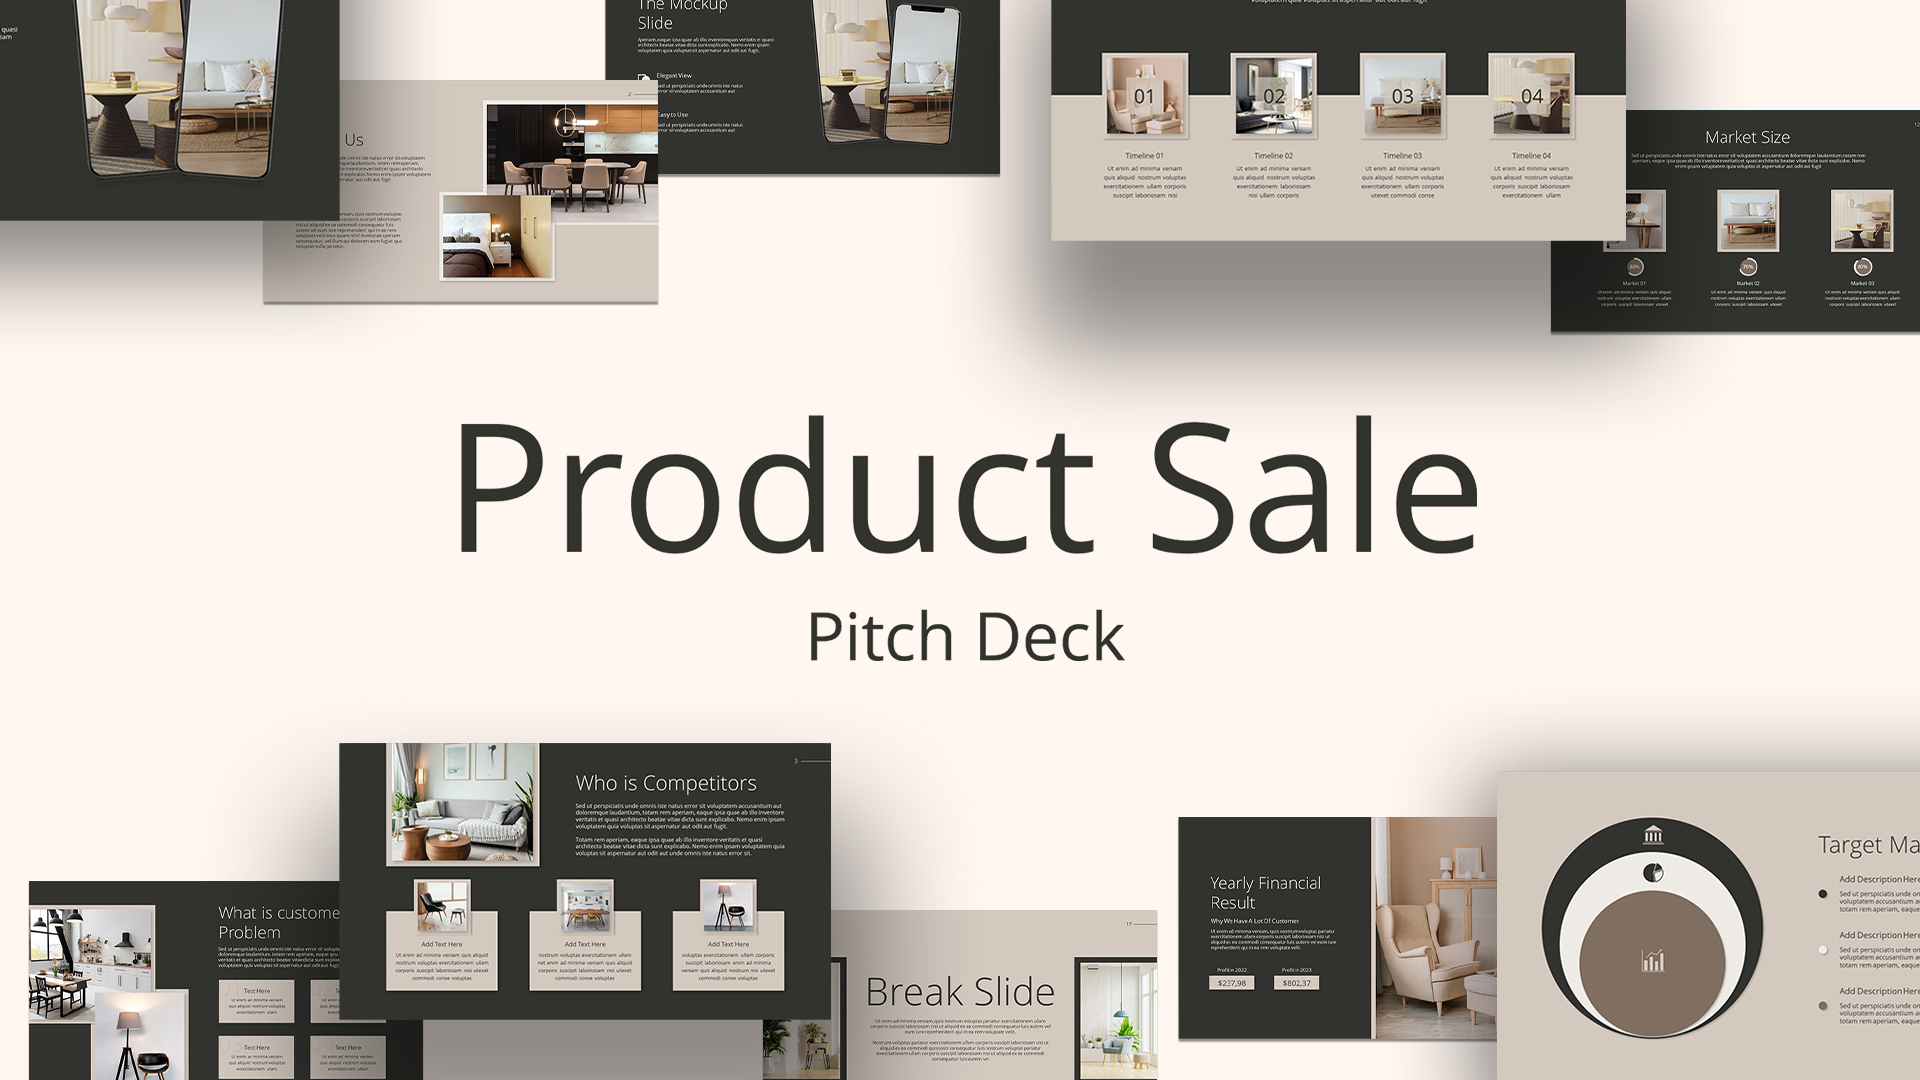 Product Sales PowerPoint Pitch Deck Cover Image